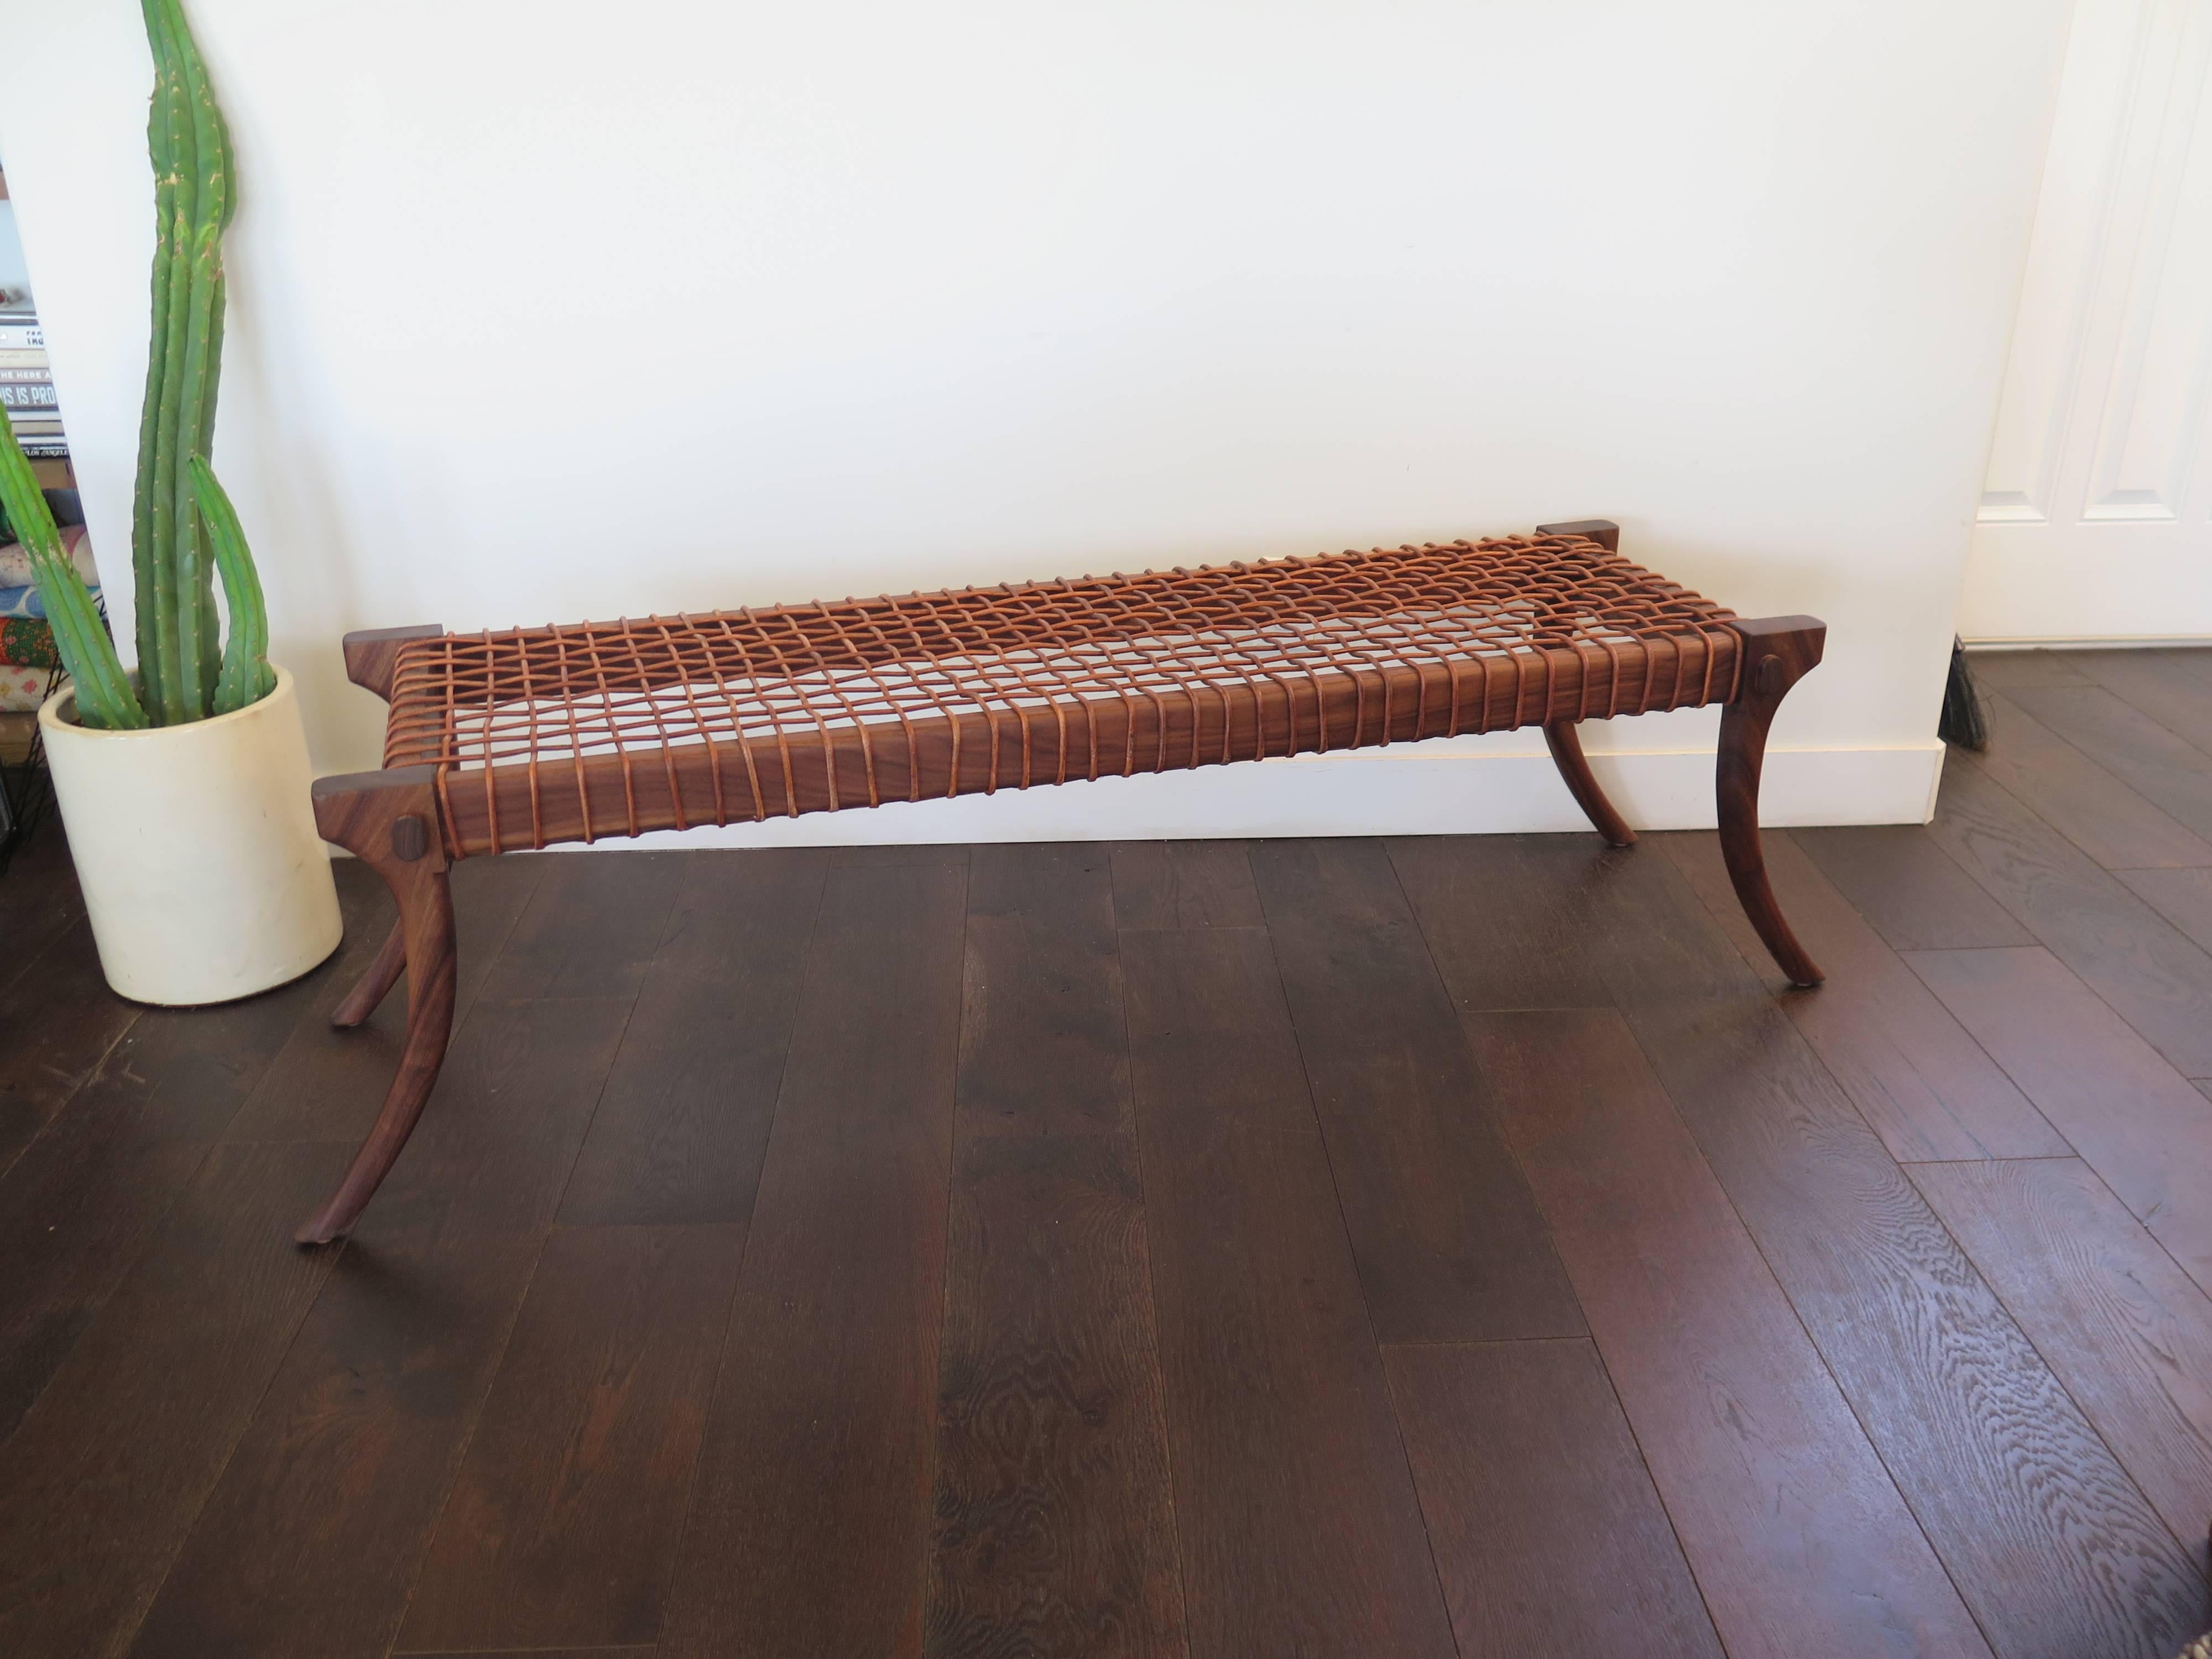 The Lola bench with leather cord strapping. Klismos Legs. Can be customized. Made-to-order.